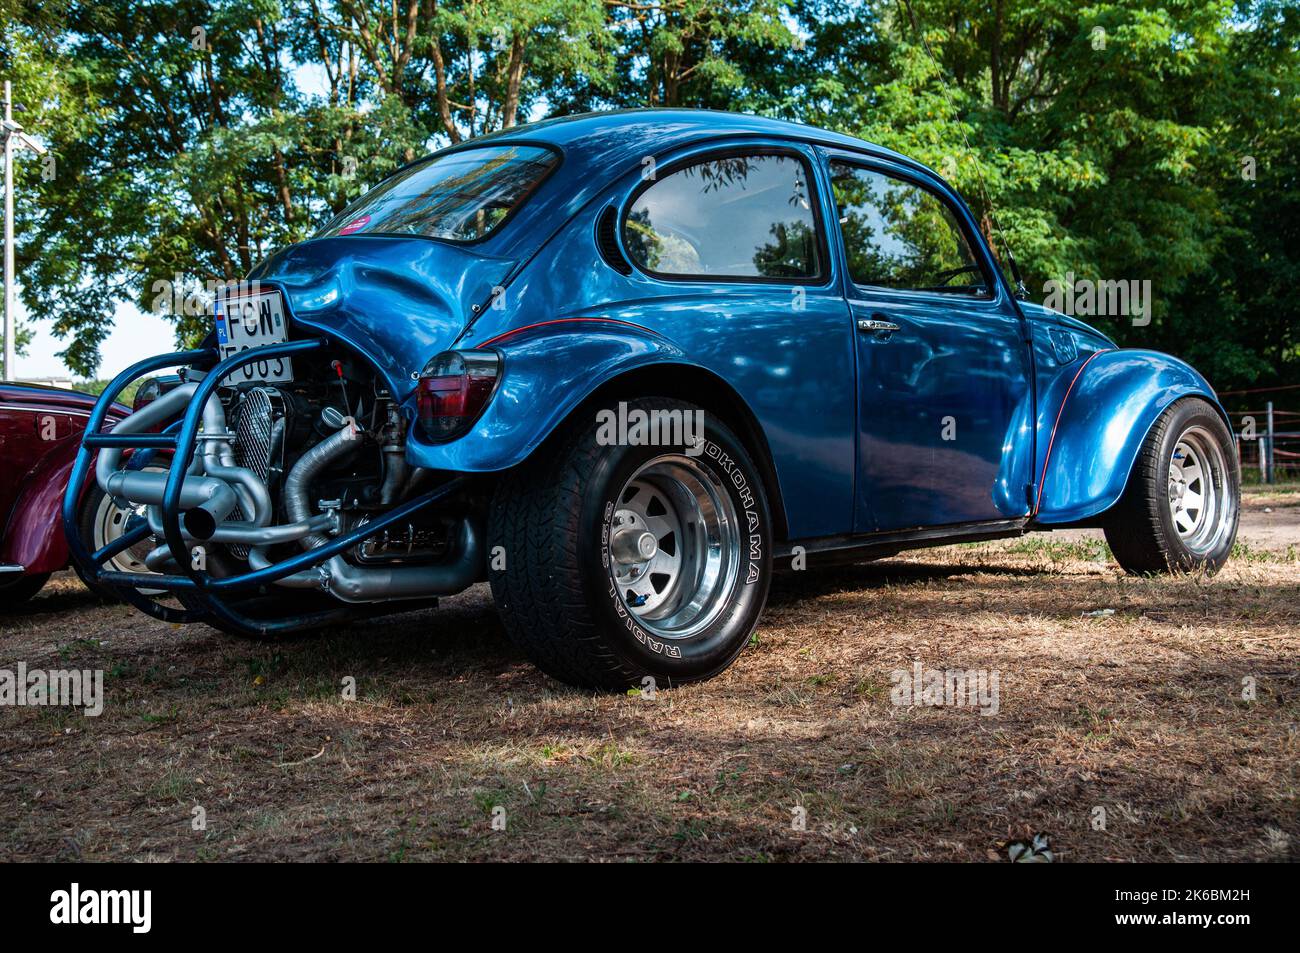 A blue Volkswagen Beetle car parked outdoors Stock Photo